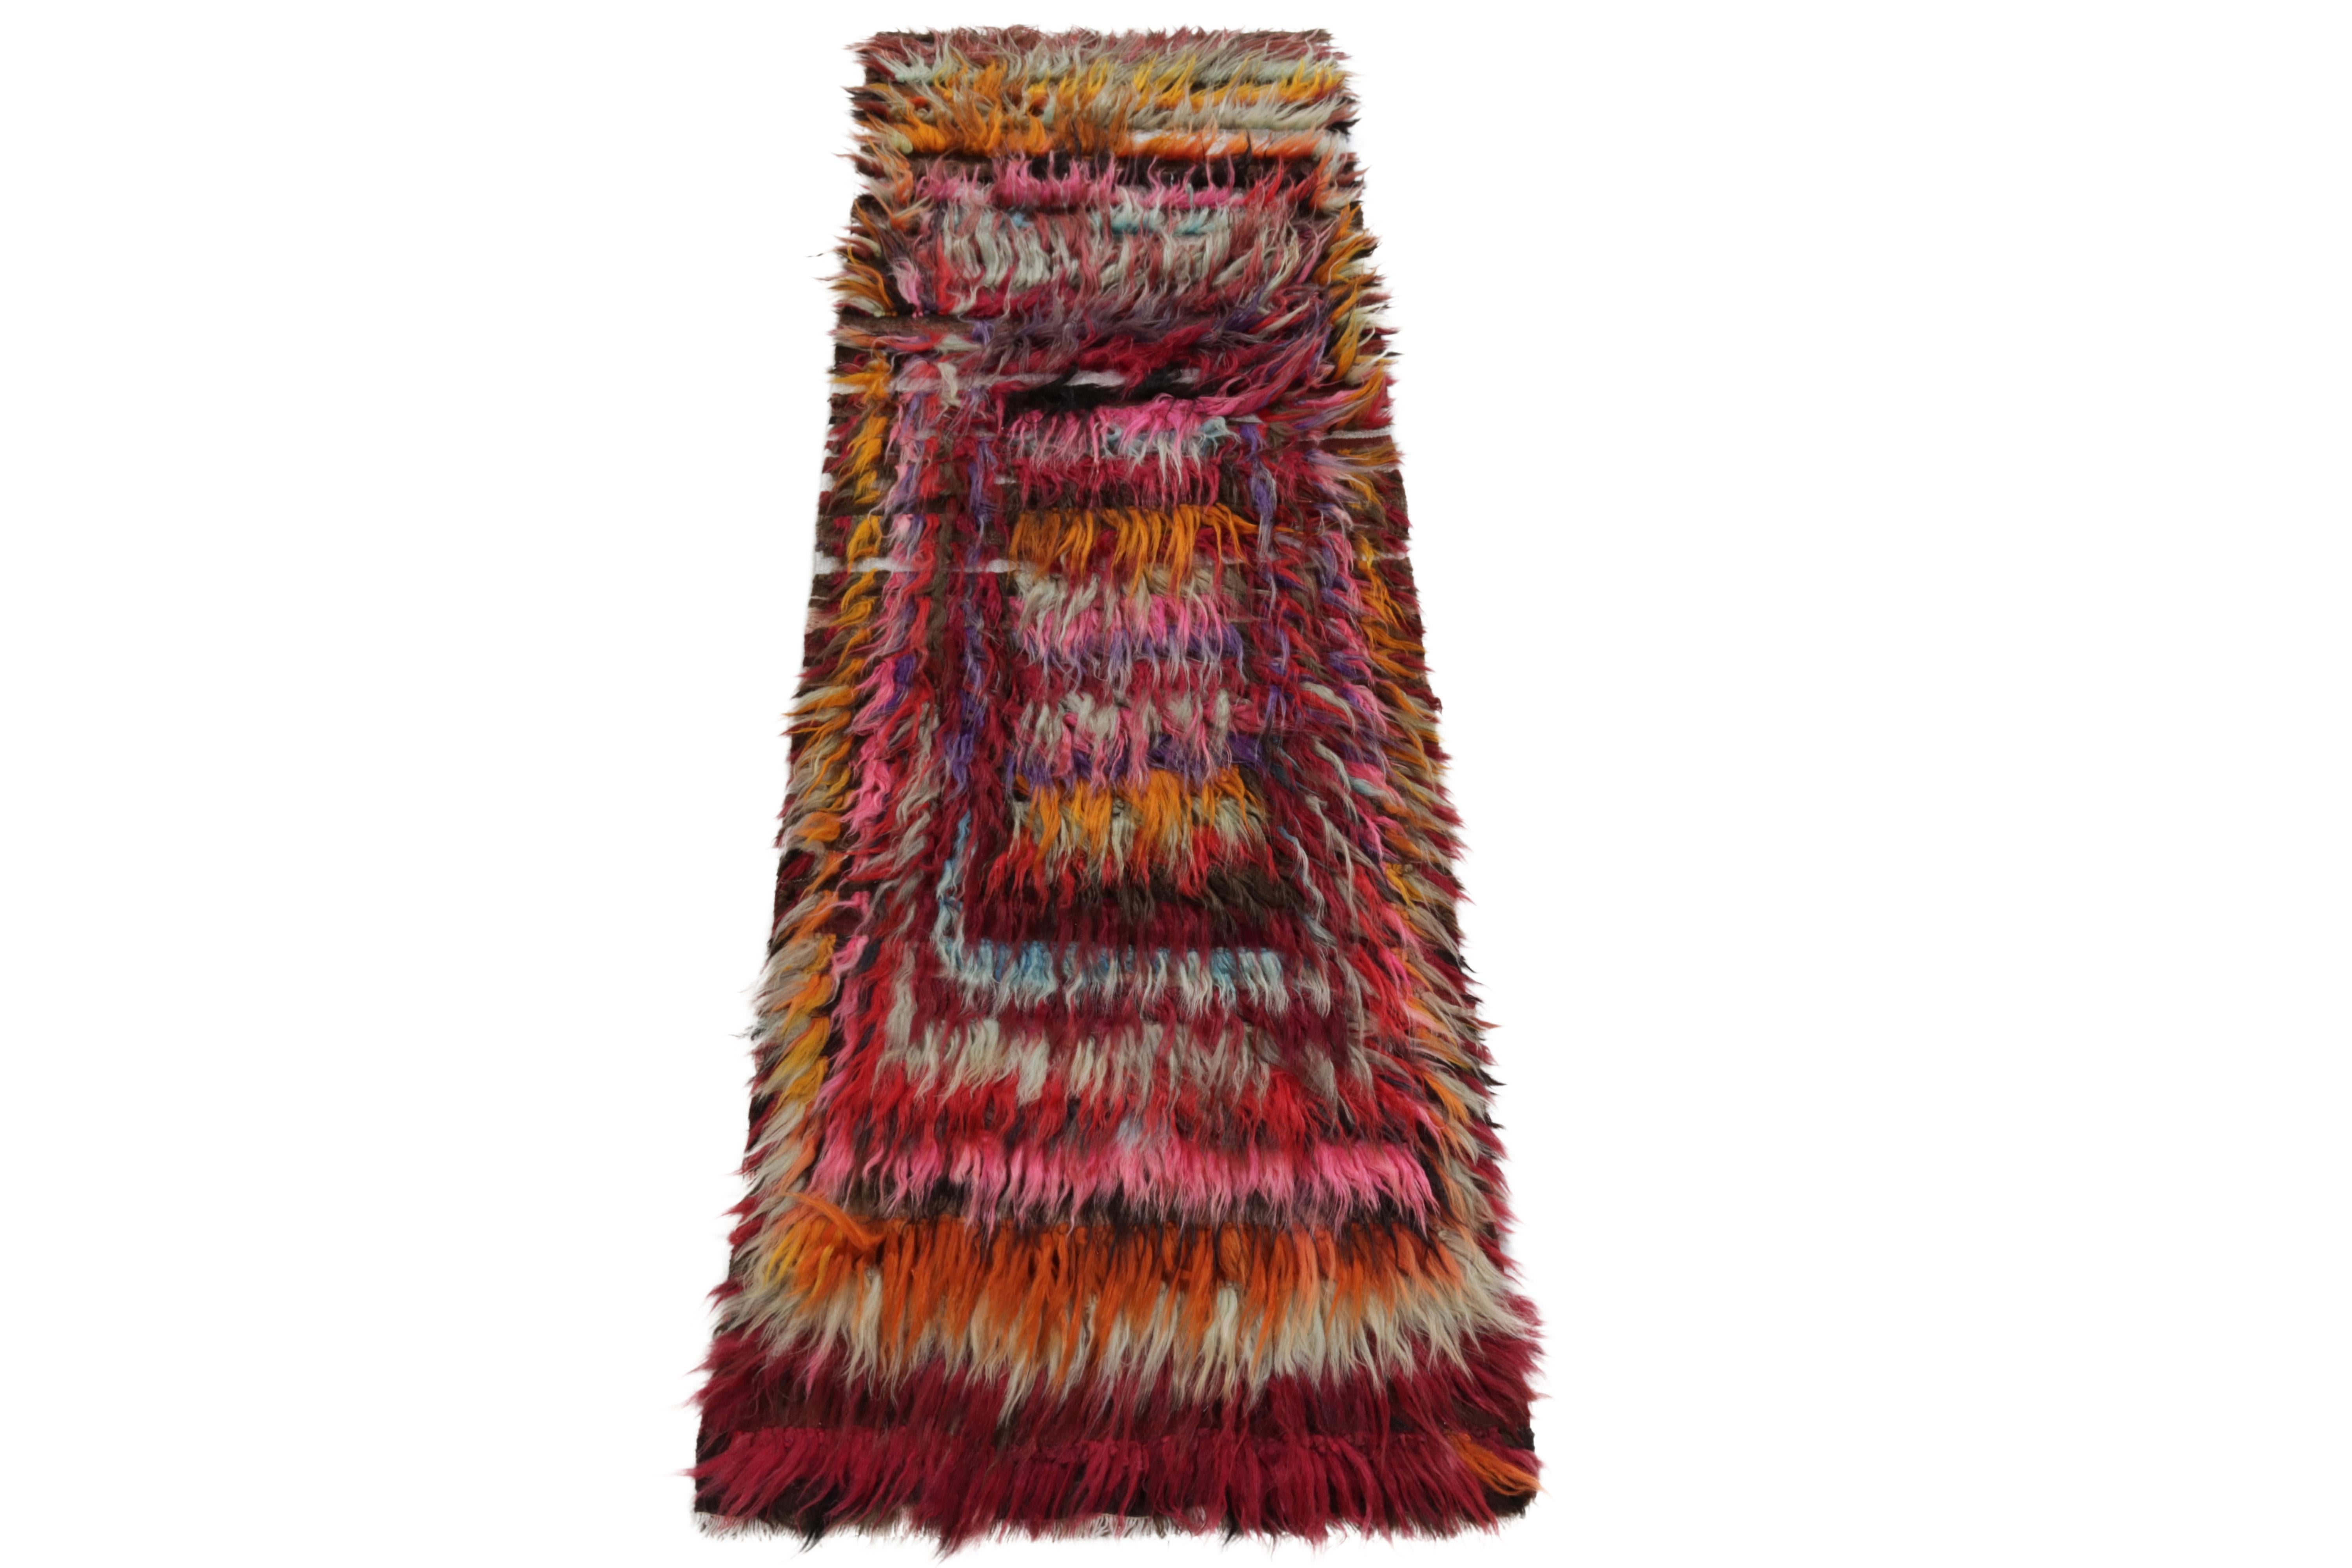 From Rug & Kilim’s vintage selections, a hand-knotted Tulu mid-century runner carrying a luscious high pile. Originating from Turkey circa 1950-1960, the 3x9 tribal rug enjoys a geometric pattern in hues of red, pink, orange, yellow, lavender &